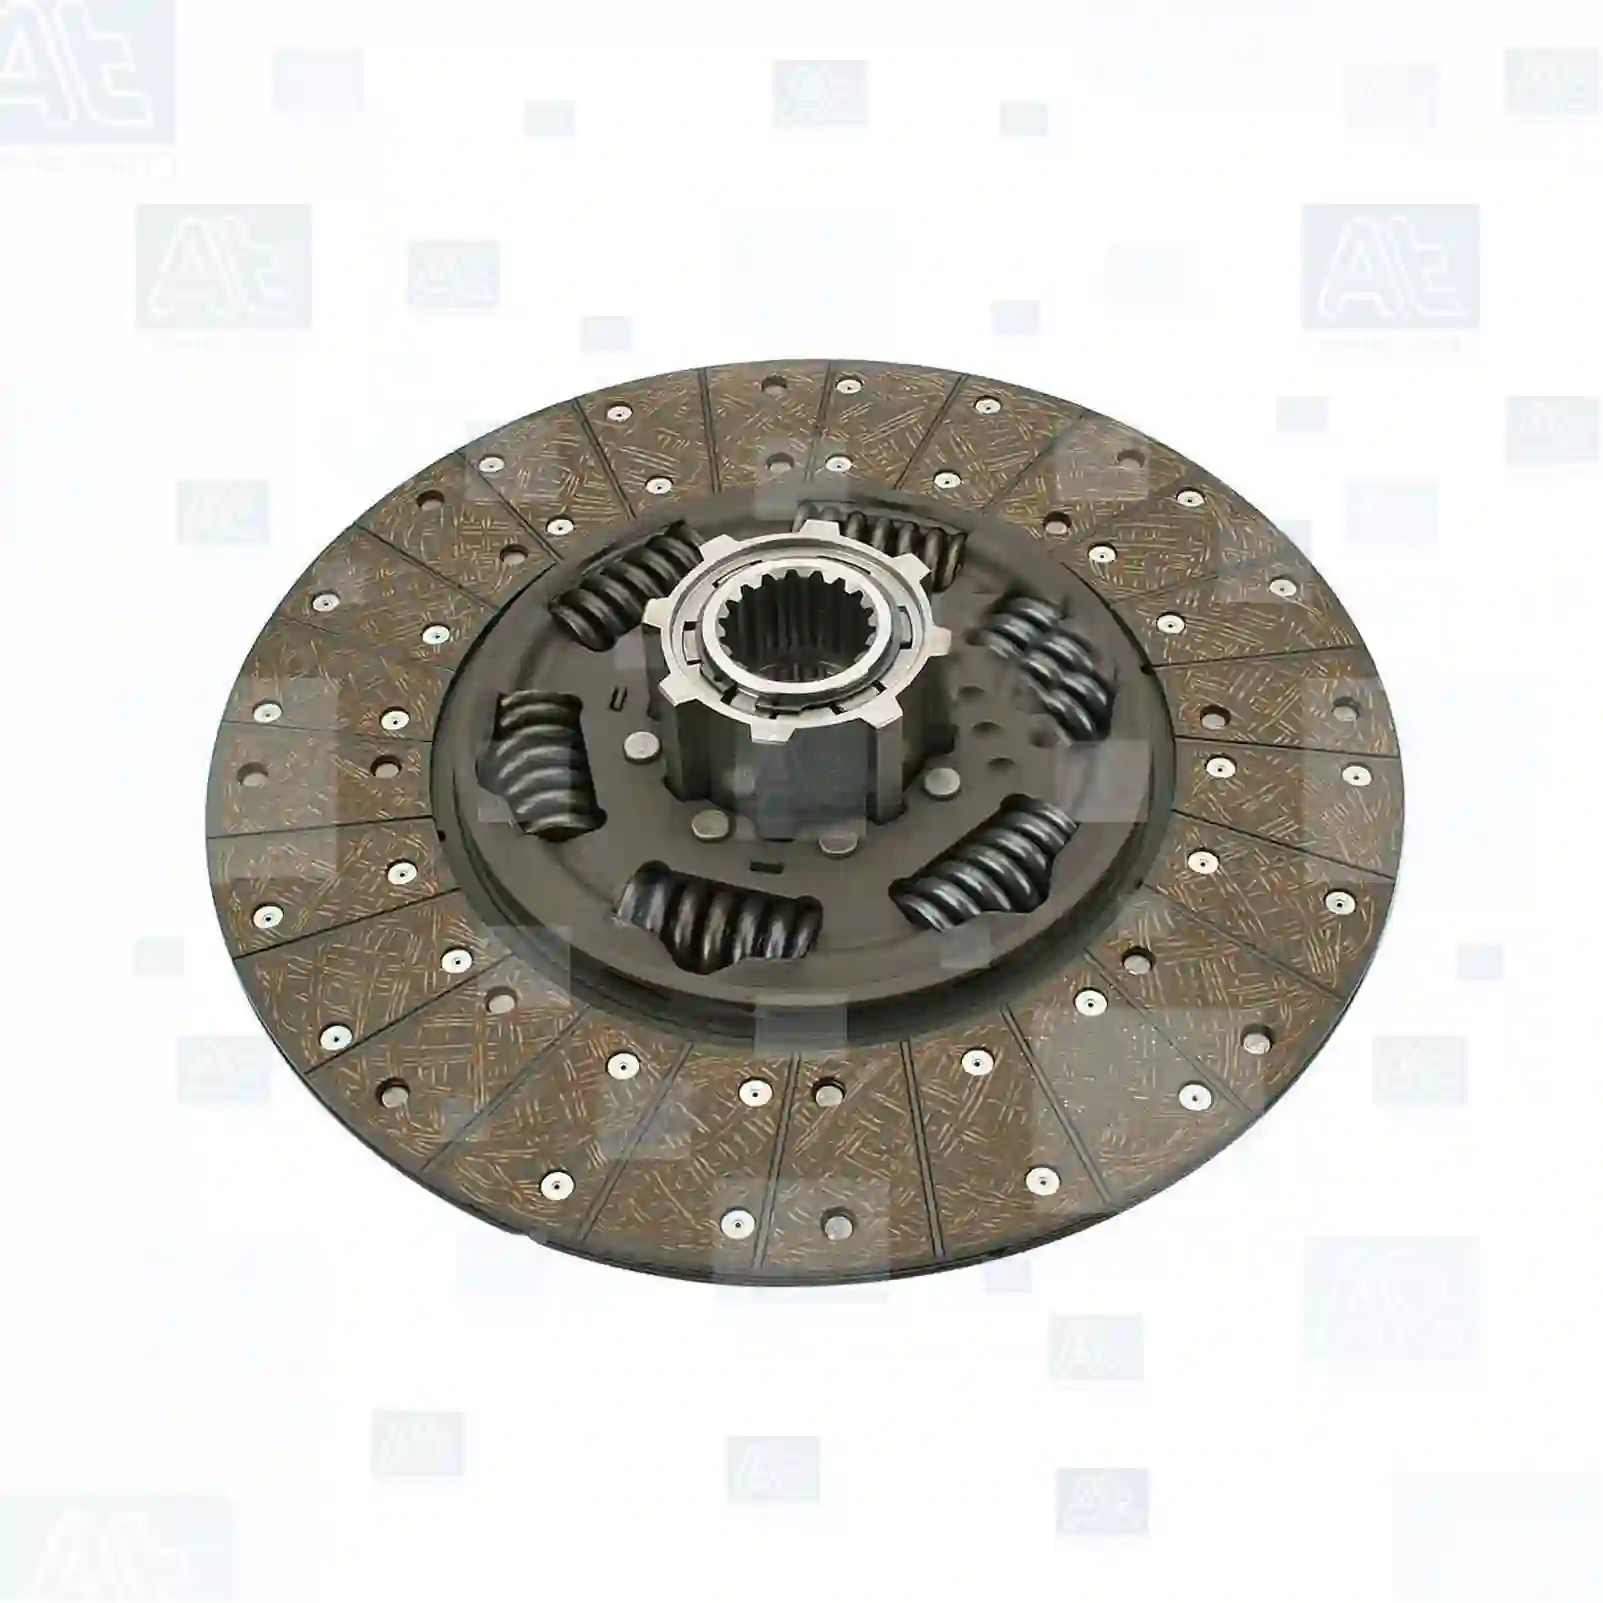 Clutch disc, 77722418, 0152507903, 0152508003, 0152508103, 0162509403, 0162509503, 0162509603, 0172500303, 0172500903, 0172501103, 0172505903, 0172506003, 0172506103, 0182501103, 0182501303, 0182506003, 018250600380, 0192505203, 019250520380, 0192506103, 019250610380, 0202503803, 0202509403, 020250940380, 0212502003, 0212502103, 0212502203, 021250220380, 0212507603, 0212508403, 0212508503, 0212508703, 0212509703, 0222501503, 0242500603, ZG30297-0008 ||  77722418 At Spare Part | Engine, Accelerator Pedal, Camshaft, Connecting Rod, Crankcase, Crankshaft, Cylinder Head, Engine Suspension Mountings, Exhaust Manifold, Exhaust Gas Recirculation, Filter Kits, Flywheel Housing, General Overhaul Kits, Engine, Intake Manifold, Oil Cleaner, Oil Cooler, Oil Filter, Oil Pump, Oil Sump, Piston & Liner, Sensor & Switch, Timing Case, Turbocharger, Cooling System, Belt Tensioner, Coolant Filter, Coolant Pipe, Corrosion Prevention Agent, Drive, Expansion Tank, Fan, Intercooler, Monitors & Gauges, Radiator, Thermostat, V-Belt / Timing belt, Water Pump, Fuel System, Electronical Injector Unit, Feed Pump, Fuel Filter, cpl., Fuel Gauge Sender,  Fuel Line, Fuel Pump, Fuel Tank, Injection Line Kit, Injection Pump, Exhaust System, Clutch & Pedal, Gearbox, Propeller Shaft, Axles, Brake System, Hubs & Wheels, Suspension, Leaf Spring, Universal Parts / Accessories, Steering, Electrical System, Cabin Clutch disc, 77722418, 0152507903, 0152508003, 0152508103, 0162509403, 0162509503, 0162509603, 0172500303, 0172500903, 0172501103, 0172505903, 0172506003, 0172506103, 0182501103, 0182501303, 0182506003, 018250600380, 0192505203, 019250520380, 0192506103, 019250610380, 0202503803, 0202509403, 020250940380, 0212502003, 0212502103, 0212502203, 021250220380, 0212507603, 0212508403, 0212508503, 0212508703, 0212509703, 0222501503, 0242500603, ZG30297-0008 ||  77722418 At Spare Part | Engine, Accelerator Pedal, Camshaft, Connecting Rod, Crankcase, Crankshaft, Cylinder Head, Engine Suspension Mountings, Exhaust Manifold, Exhaust Gas Recirculation, Filter Kits, Flywheel Housing, General Overhaul Kits, Engine, Intake Manifold, Oil Cleaner, Oil Cooler, Oil Filter, Oil Pump, Oil Sump, Piston & Liner, Sensor & Switch, Timing Case, Turbocharger, Cooling System, Belt Tensioner, Coolant Filter, Coolant Pipe, Corrosion Prevention Agent, Drive, Expansion Tank, Fan, Intercooler, Monitors & Gauges, Radiator, Thermostat, V-Belt / Timing belt, Water Pump, Fuel System, Electronical Injector Unit, Feed Pump, Fuel Filter, cpl., Fuel Gauge Sender,  Fuel Line, Fuel Pump, Fuel Tank, Injection Line Kit, Injection Pump, Exhaust System, Clutch & Pedal, Gearbox, Propeller Shaft, Axles, Brake System, Hubs & Wheels, Suspension, Leaf Spring, Universal Parts / Accessories, Steering, Electrical System, Cabin